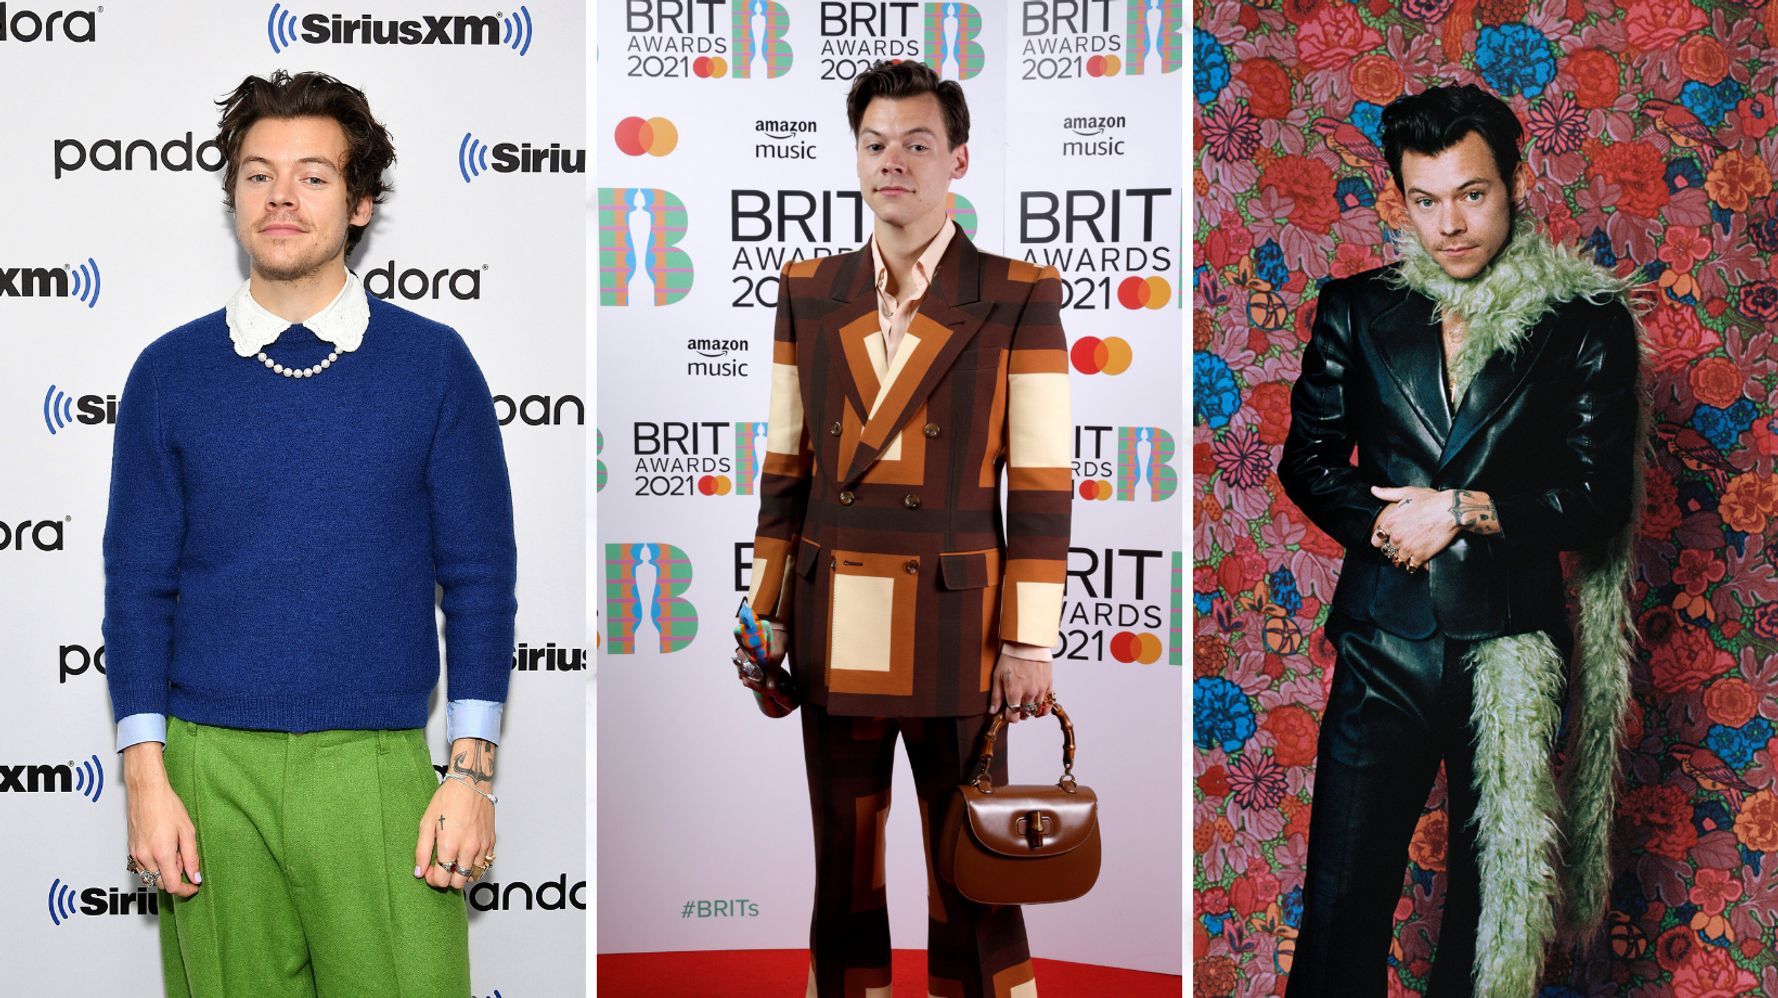 Harry Styles' Most Fashion Forward Looks Are What Make Him Beautiful